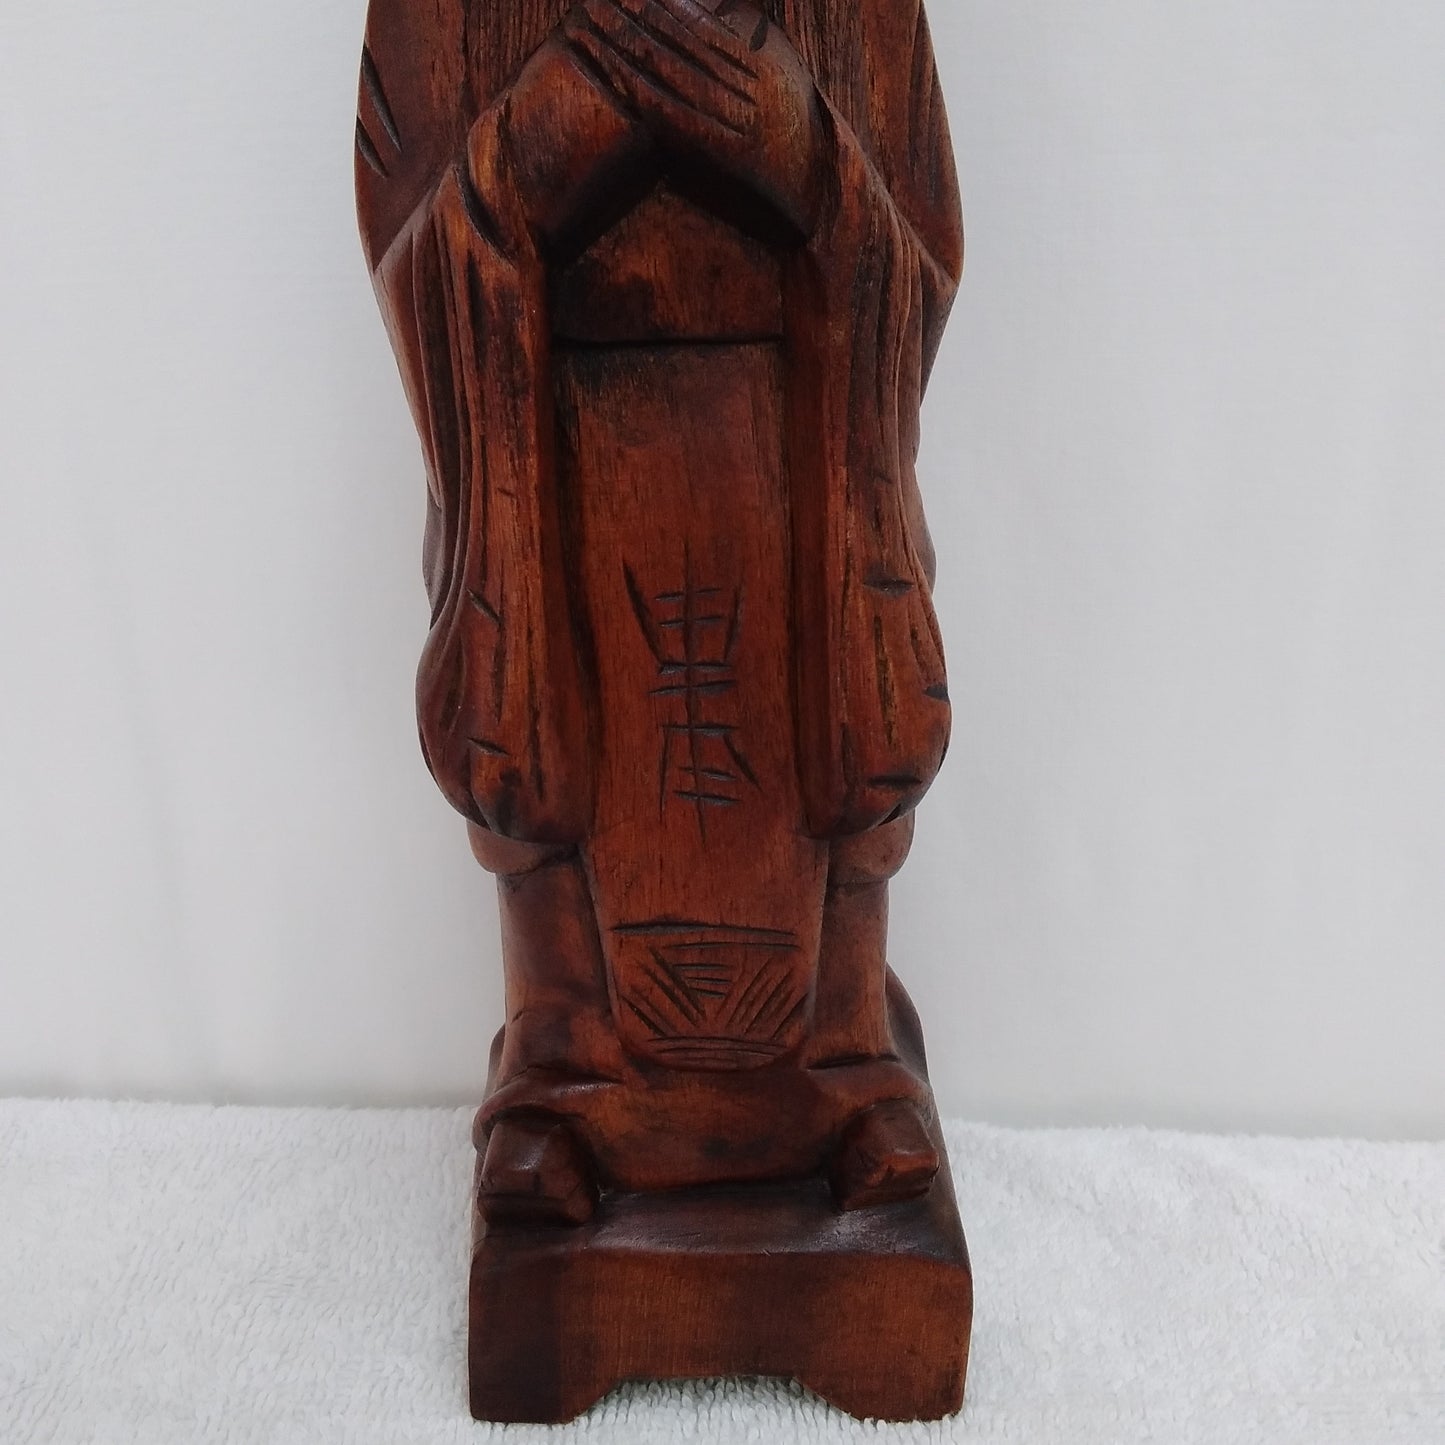 Vintage Hand Carved Wooden "Chinese Philosopher Confucius Thinking" 12" Figurine